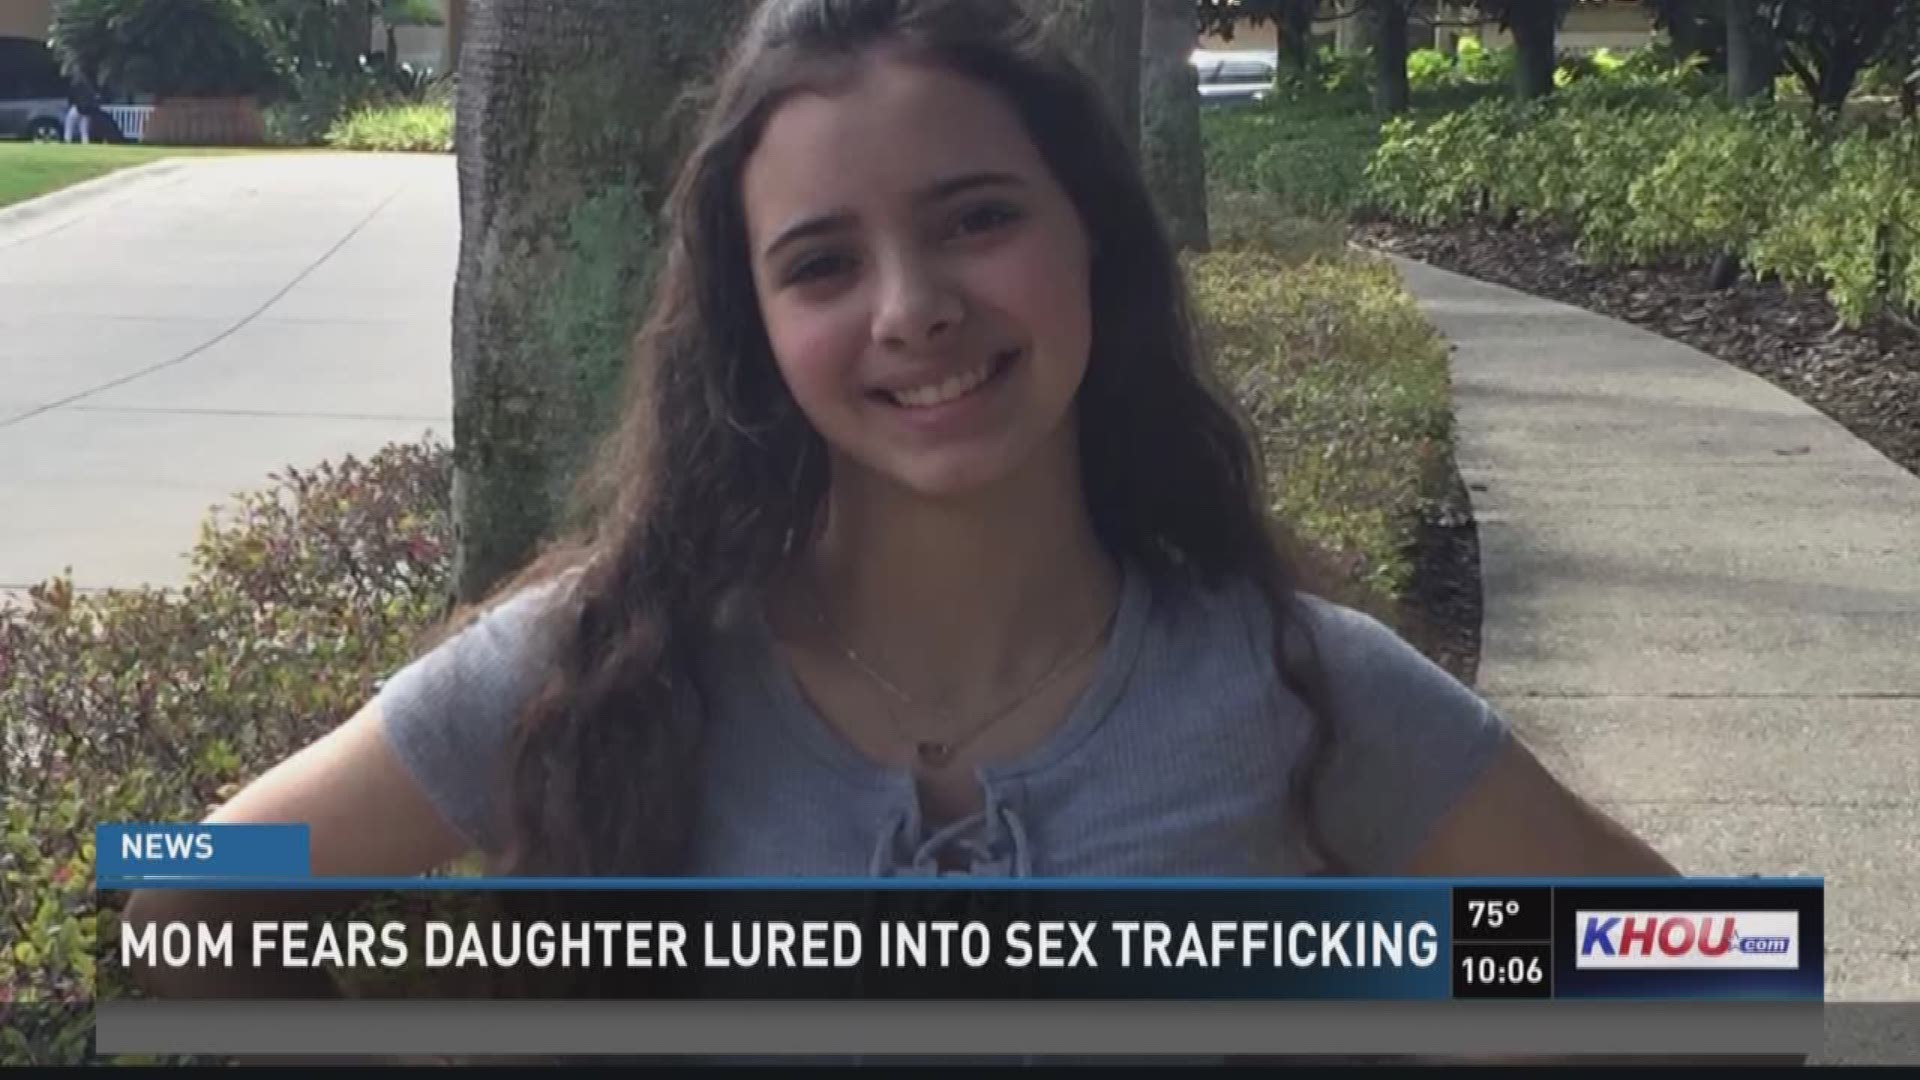 A local mother fears her missing 15 year old daughter was lured into sex trafficking.